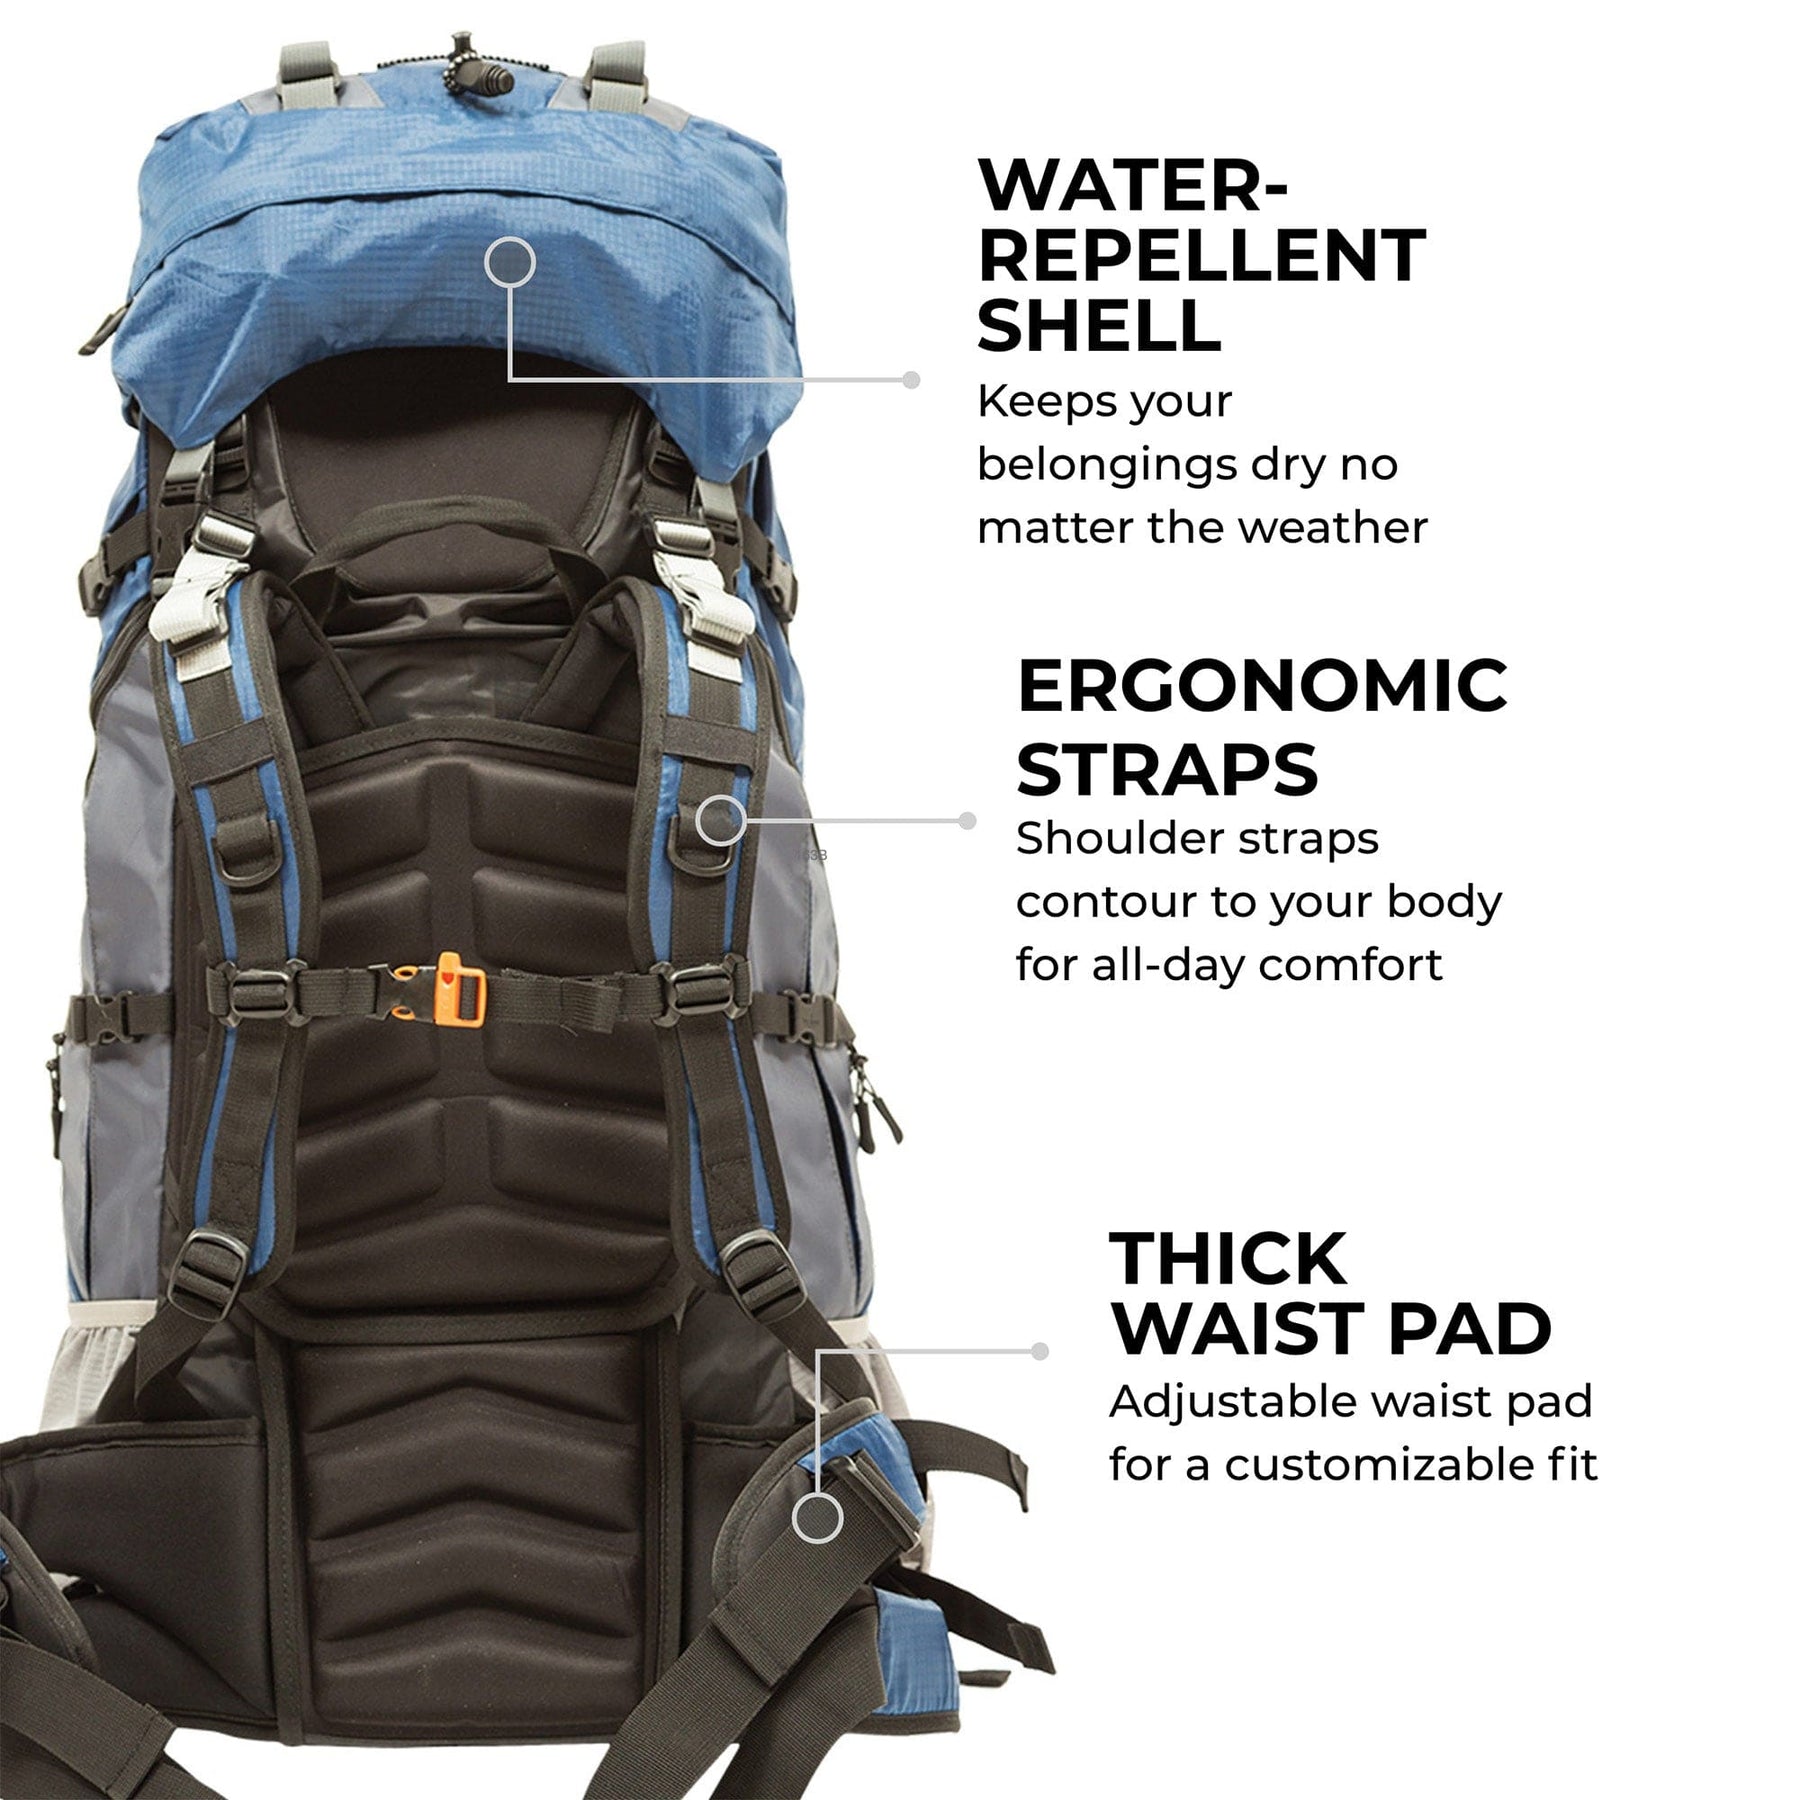 TETON Sports Outfitter 4600 Backpack 1007